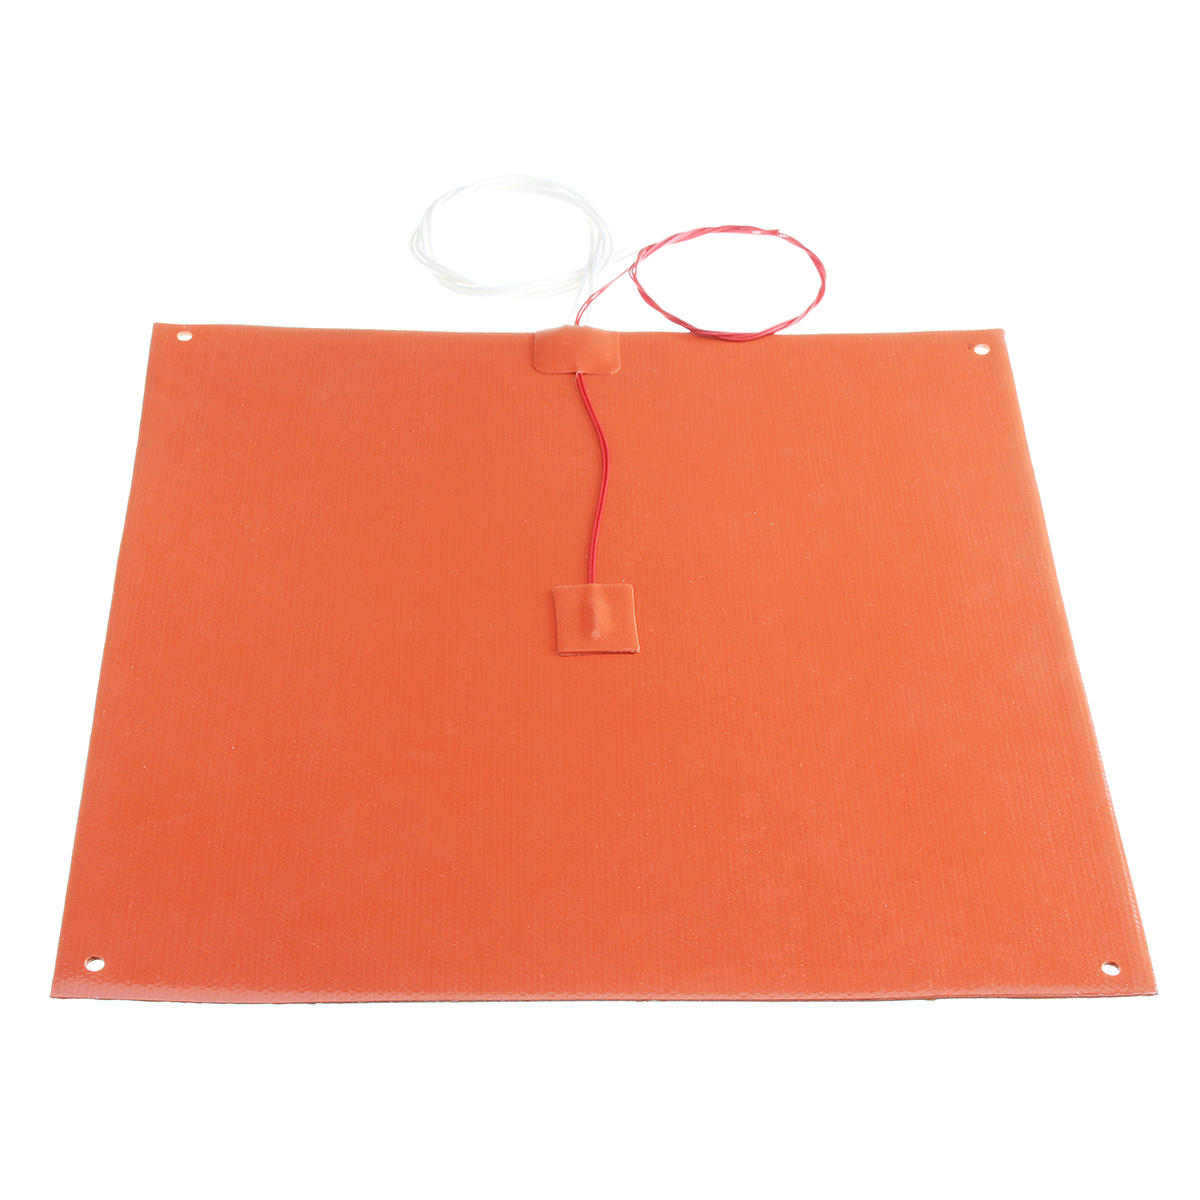 

300x300mm 120v/220v 750W Silicone Heated Bed Heating Pad With Hole For 3D Printer